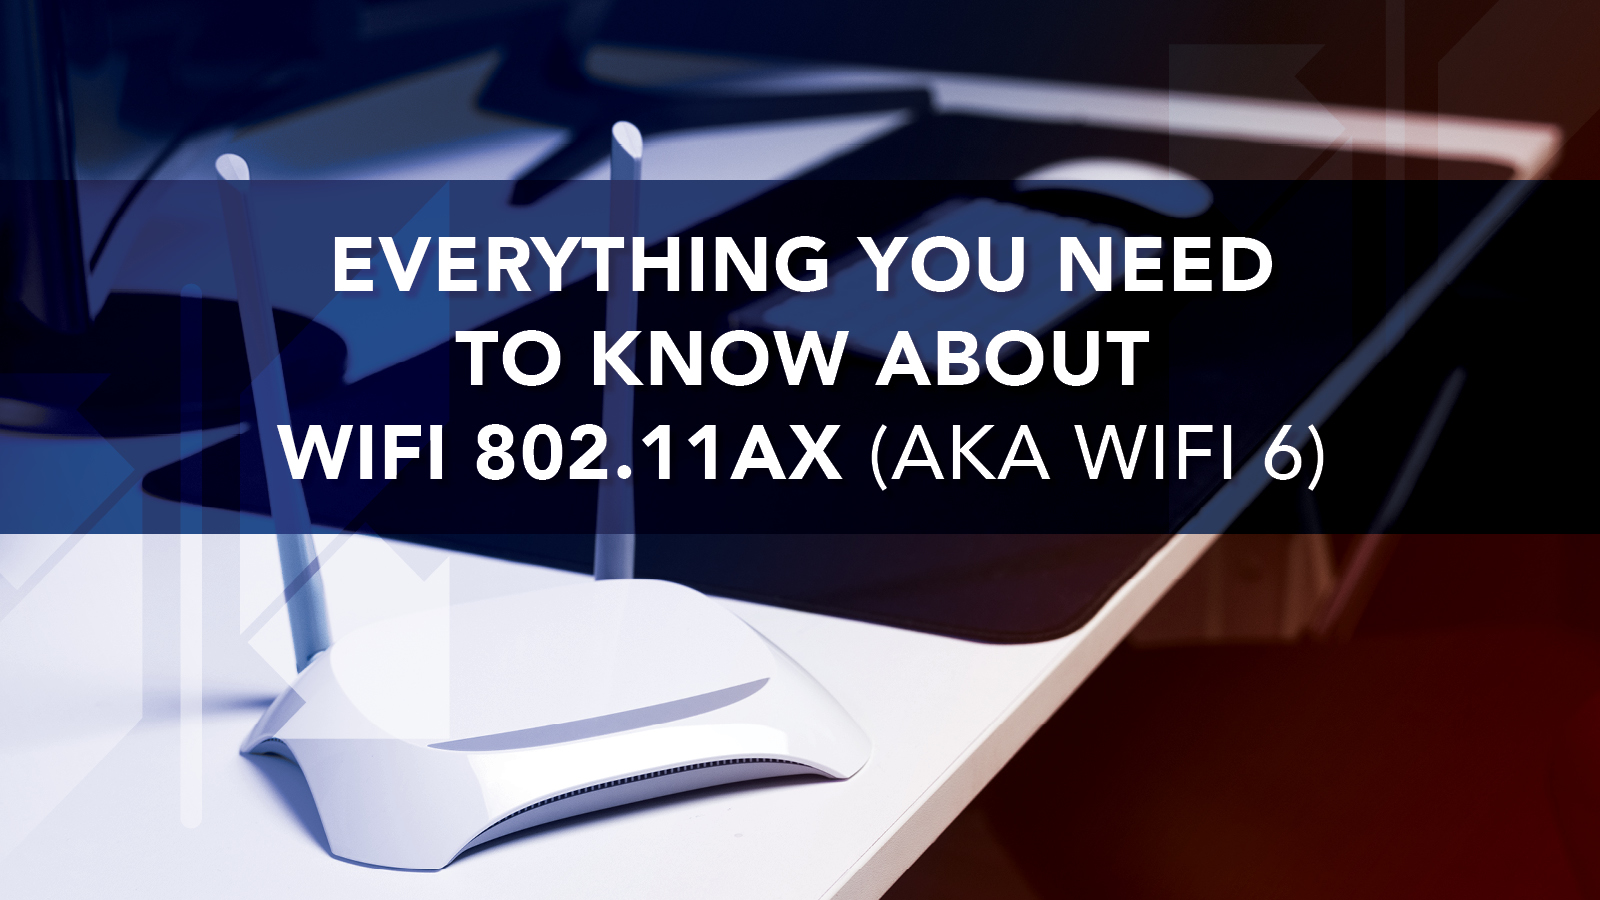 Everything You Need to Know About WiFi 802.11ax (AKA WiFi 6)